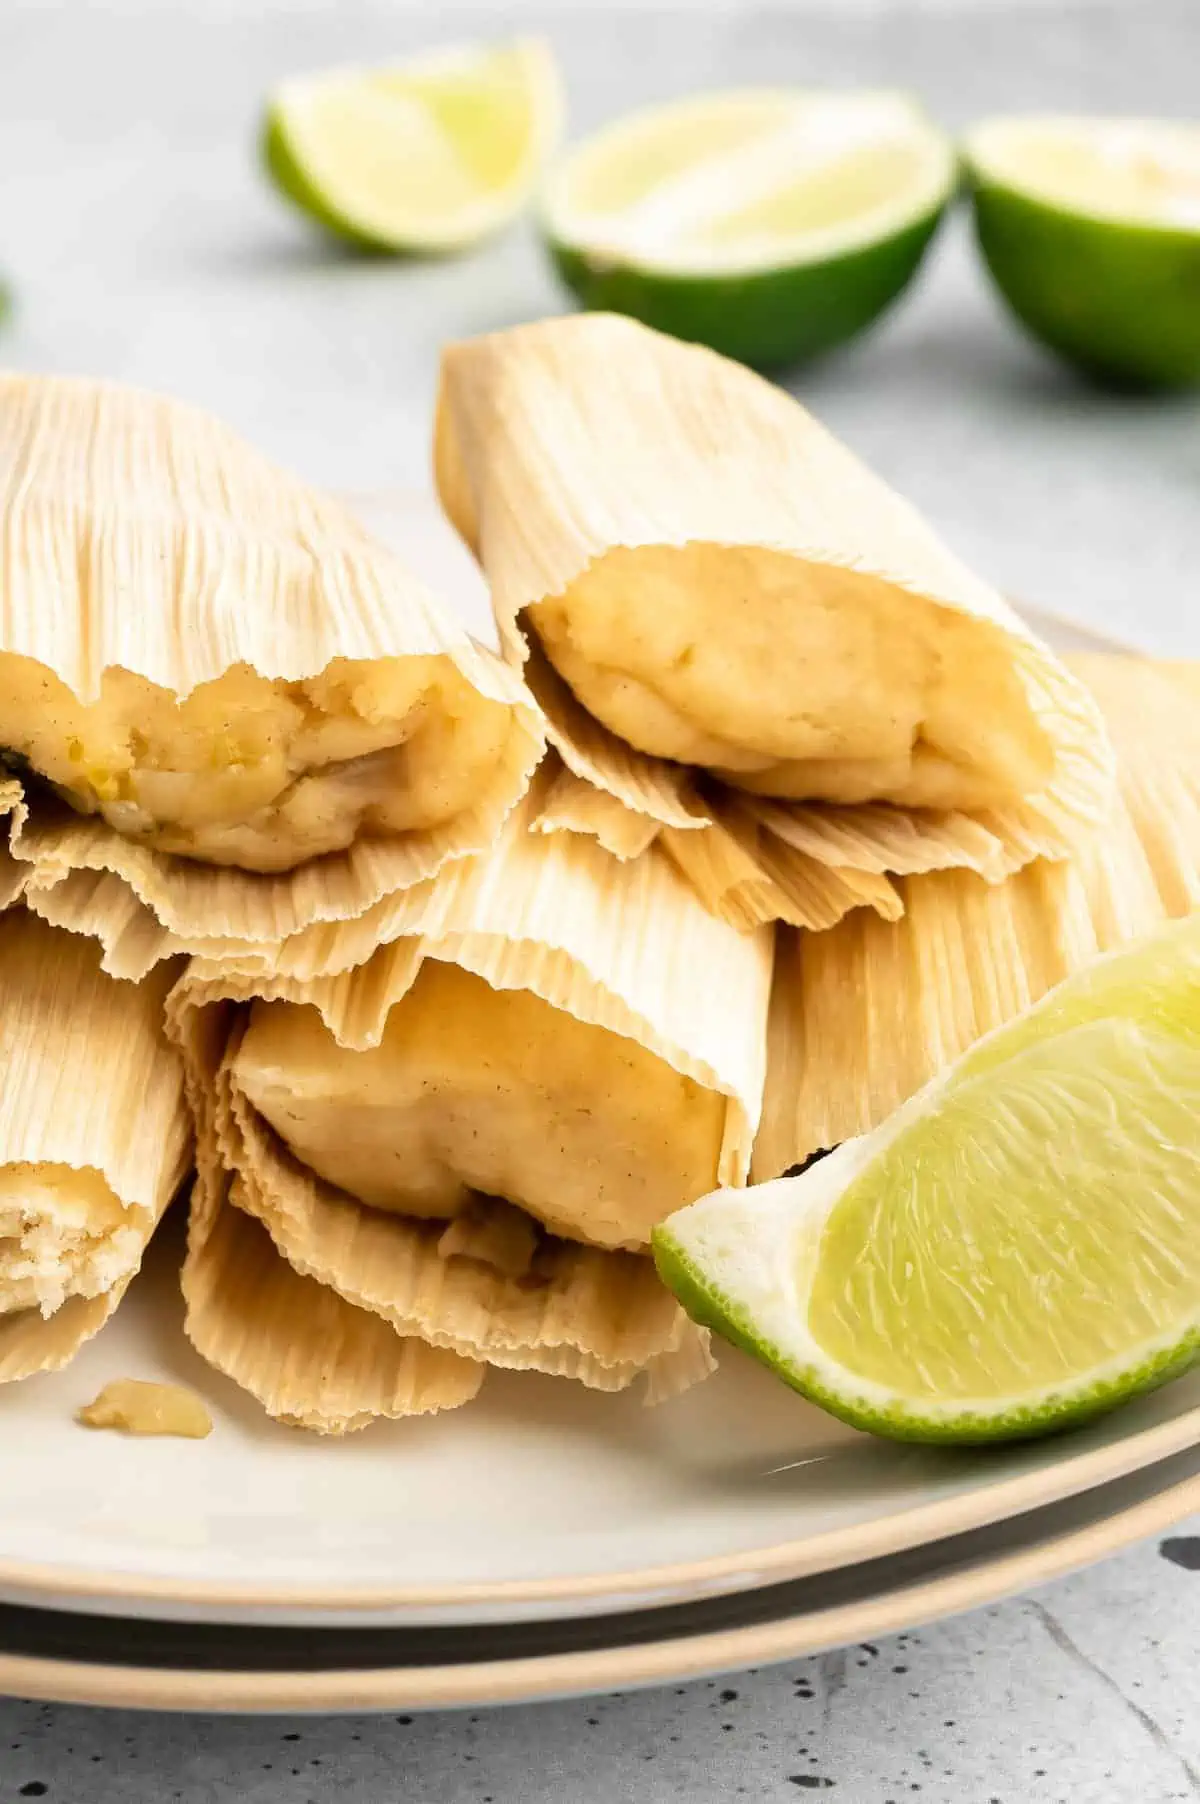 Vegan tamales, steamed and ready to eat.